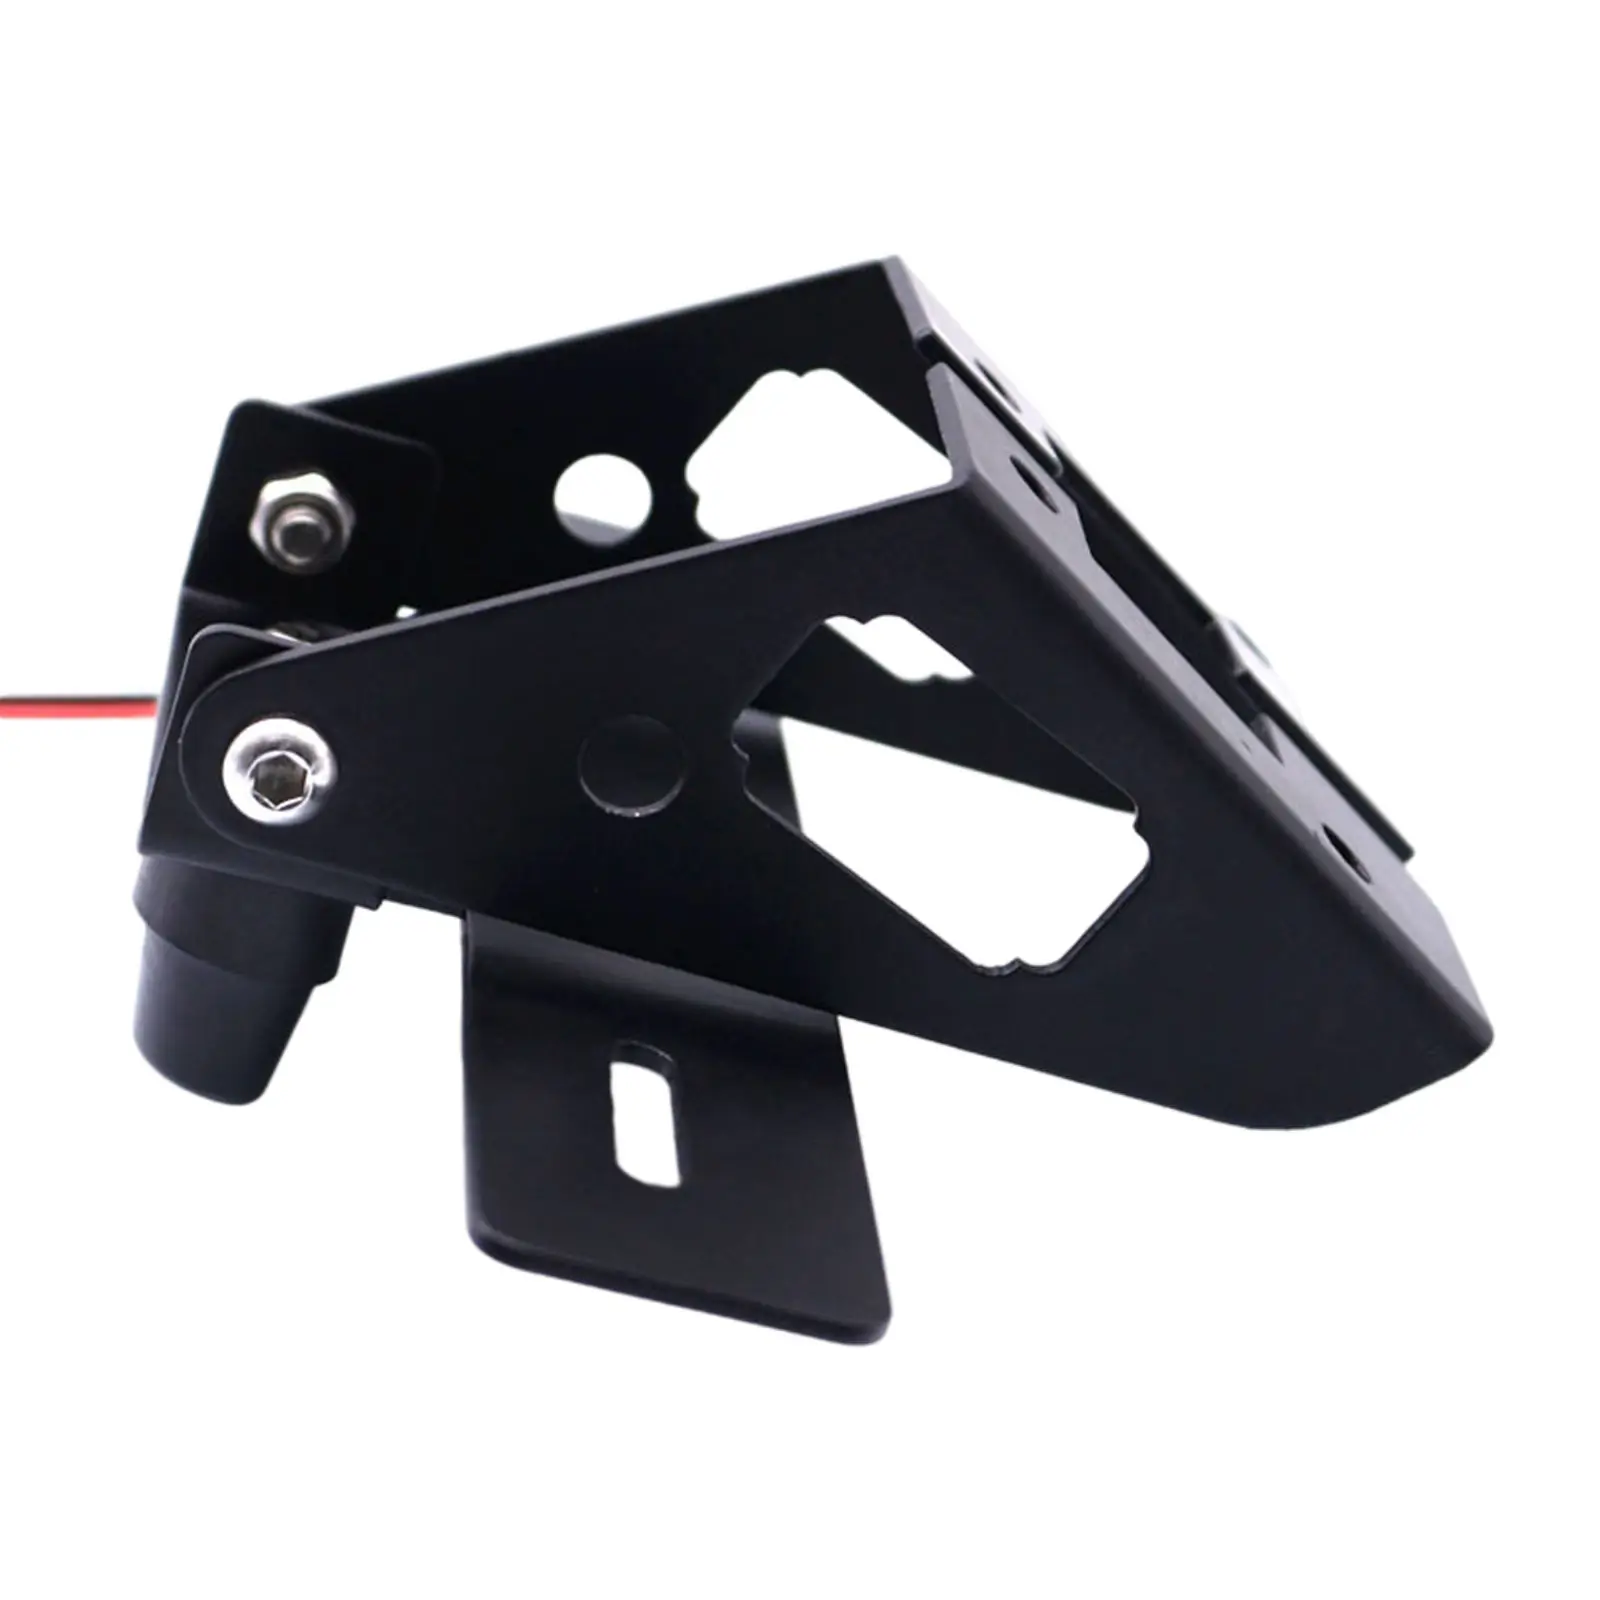 Rear License Plate Bracket Frame Color: Black License Plate Mount Fit for Kawasaki 400 250 2017-2019 Replace Motorcycle